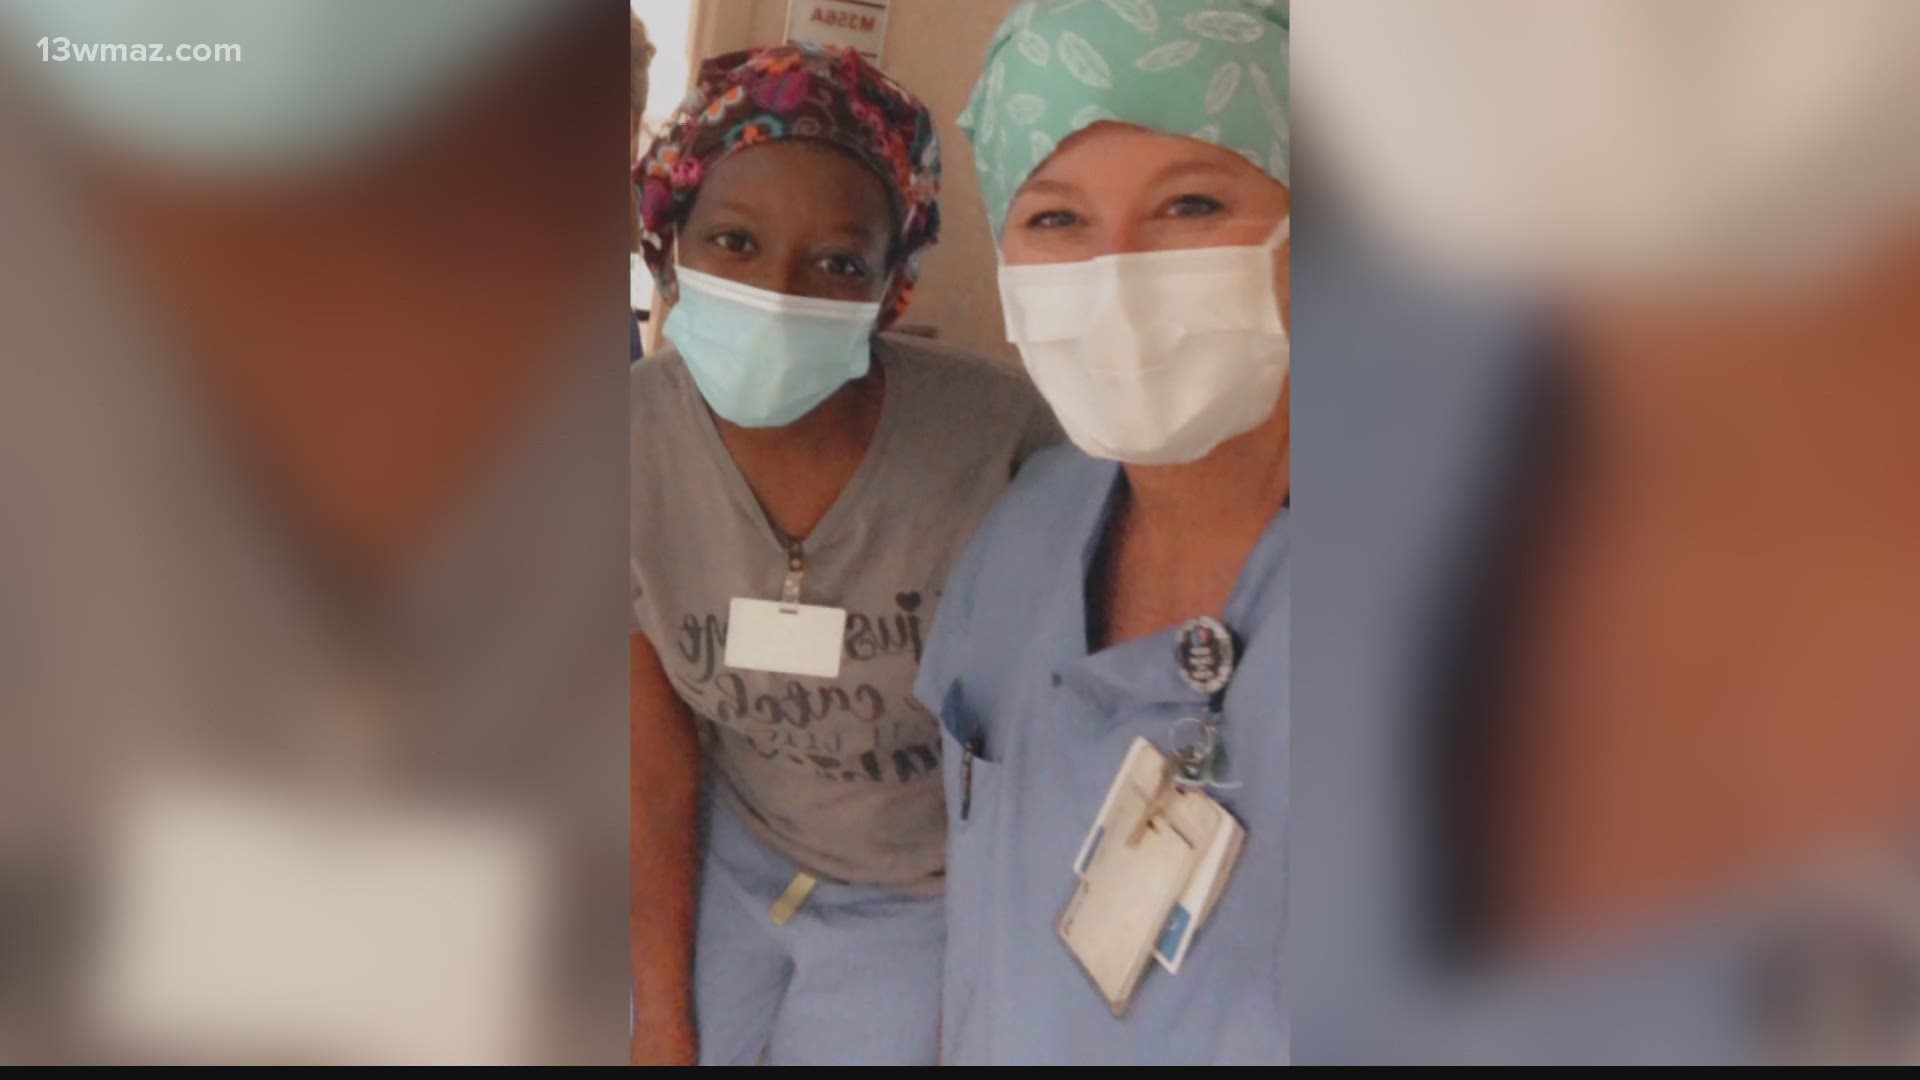 Two certified Central Georgia midwives helped deliver bundles of joy for parents on New Year’s Day.